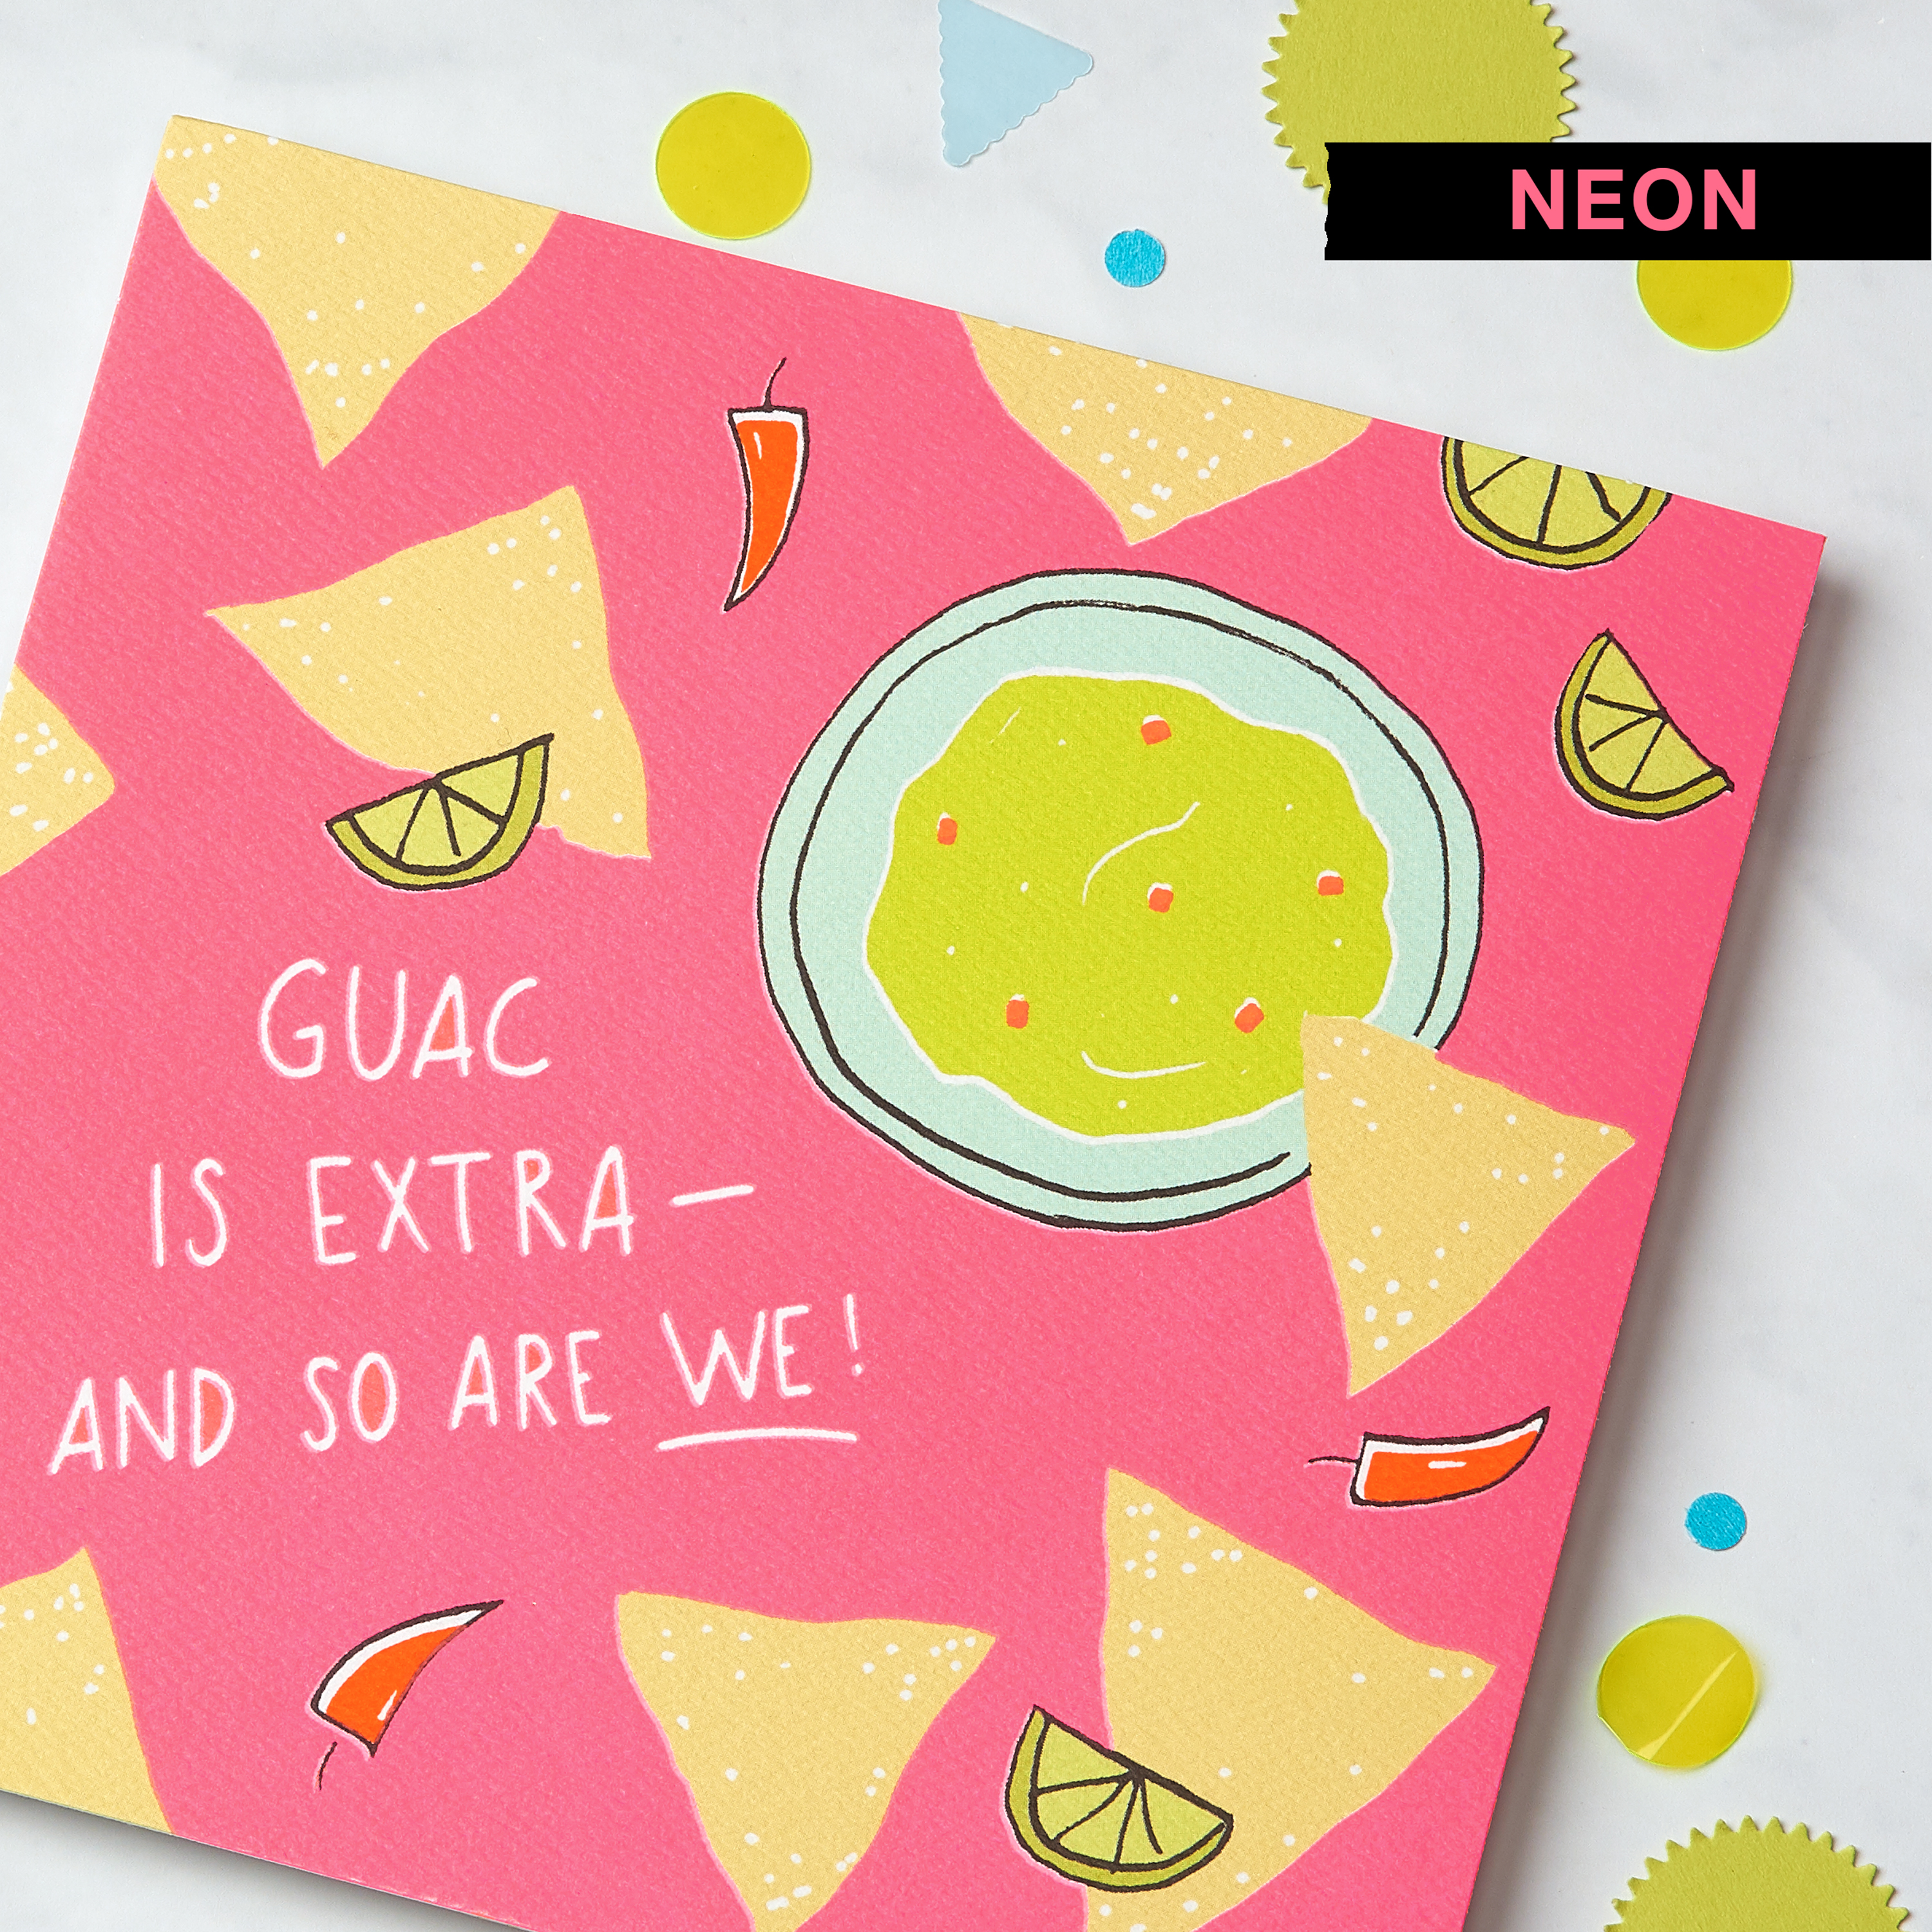 Guacamole Greeting Card - Birthday, Thinking of You, Friendship image